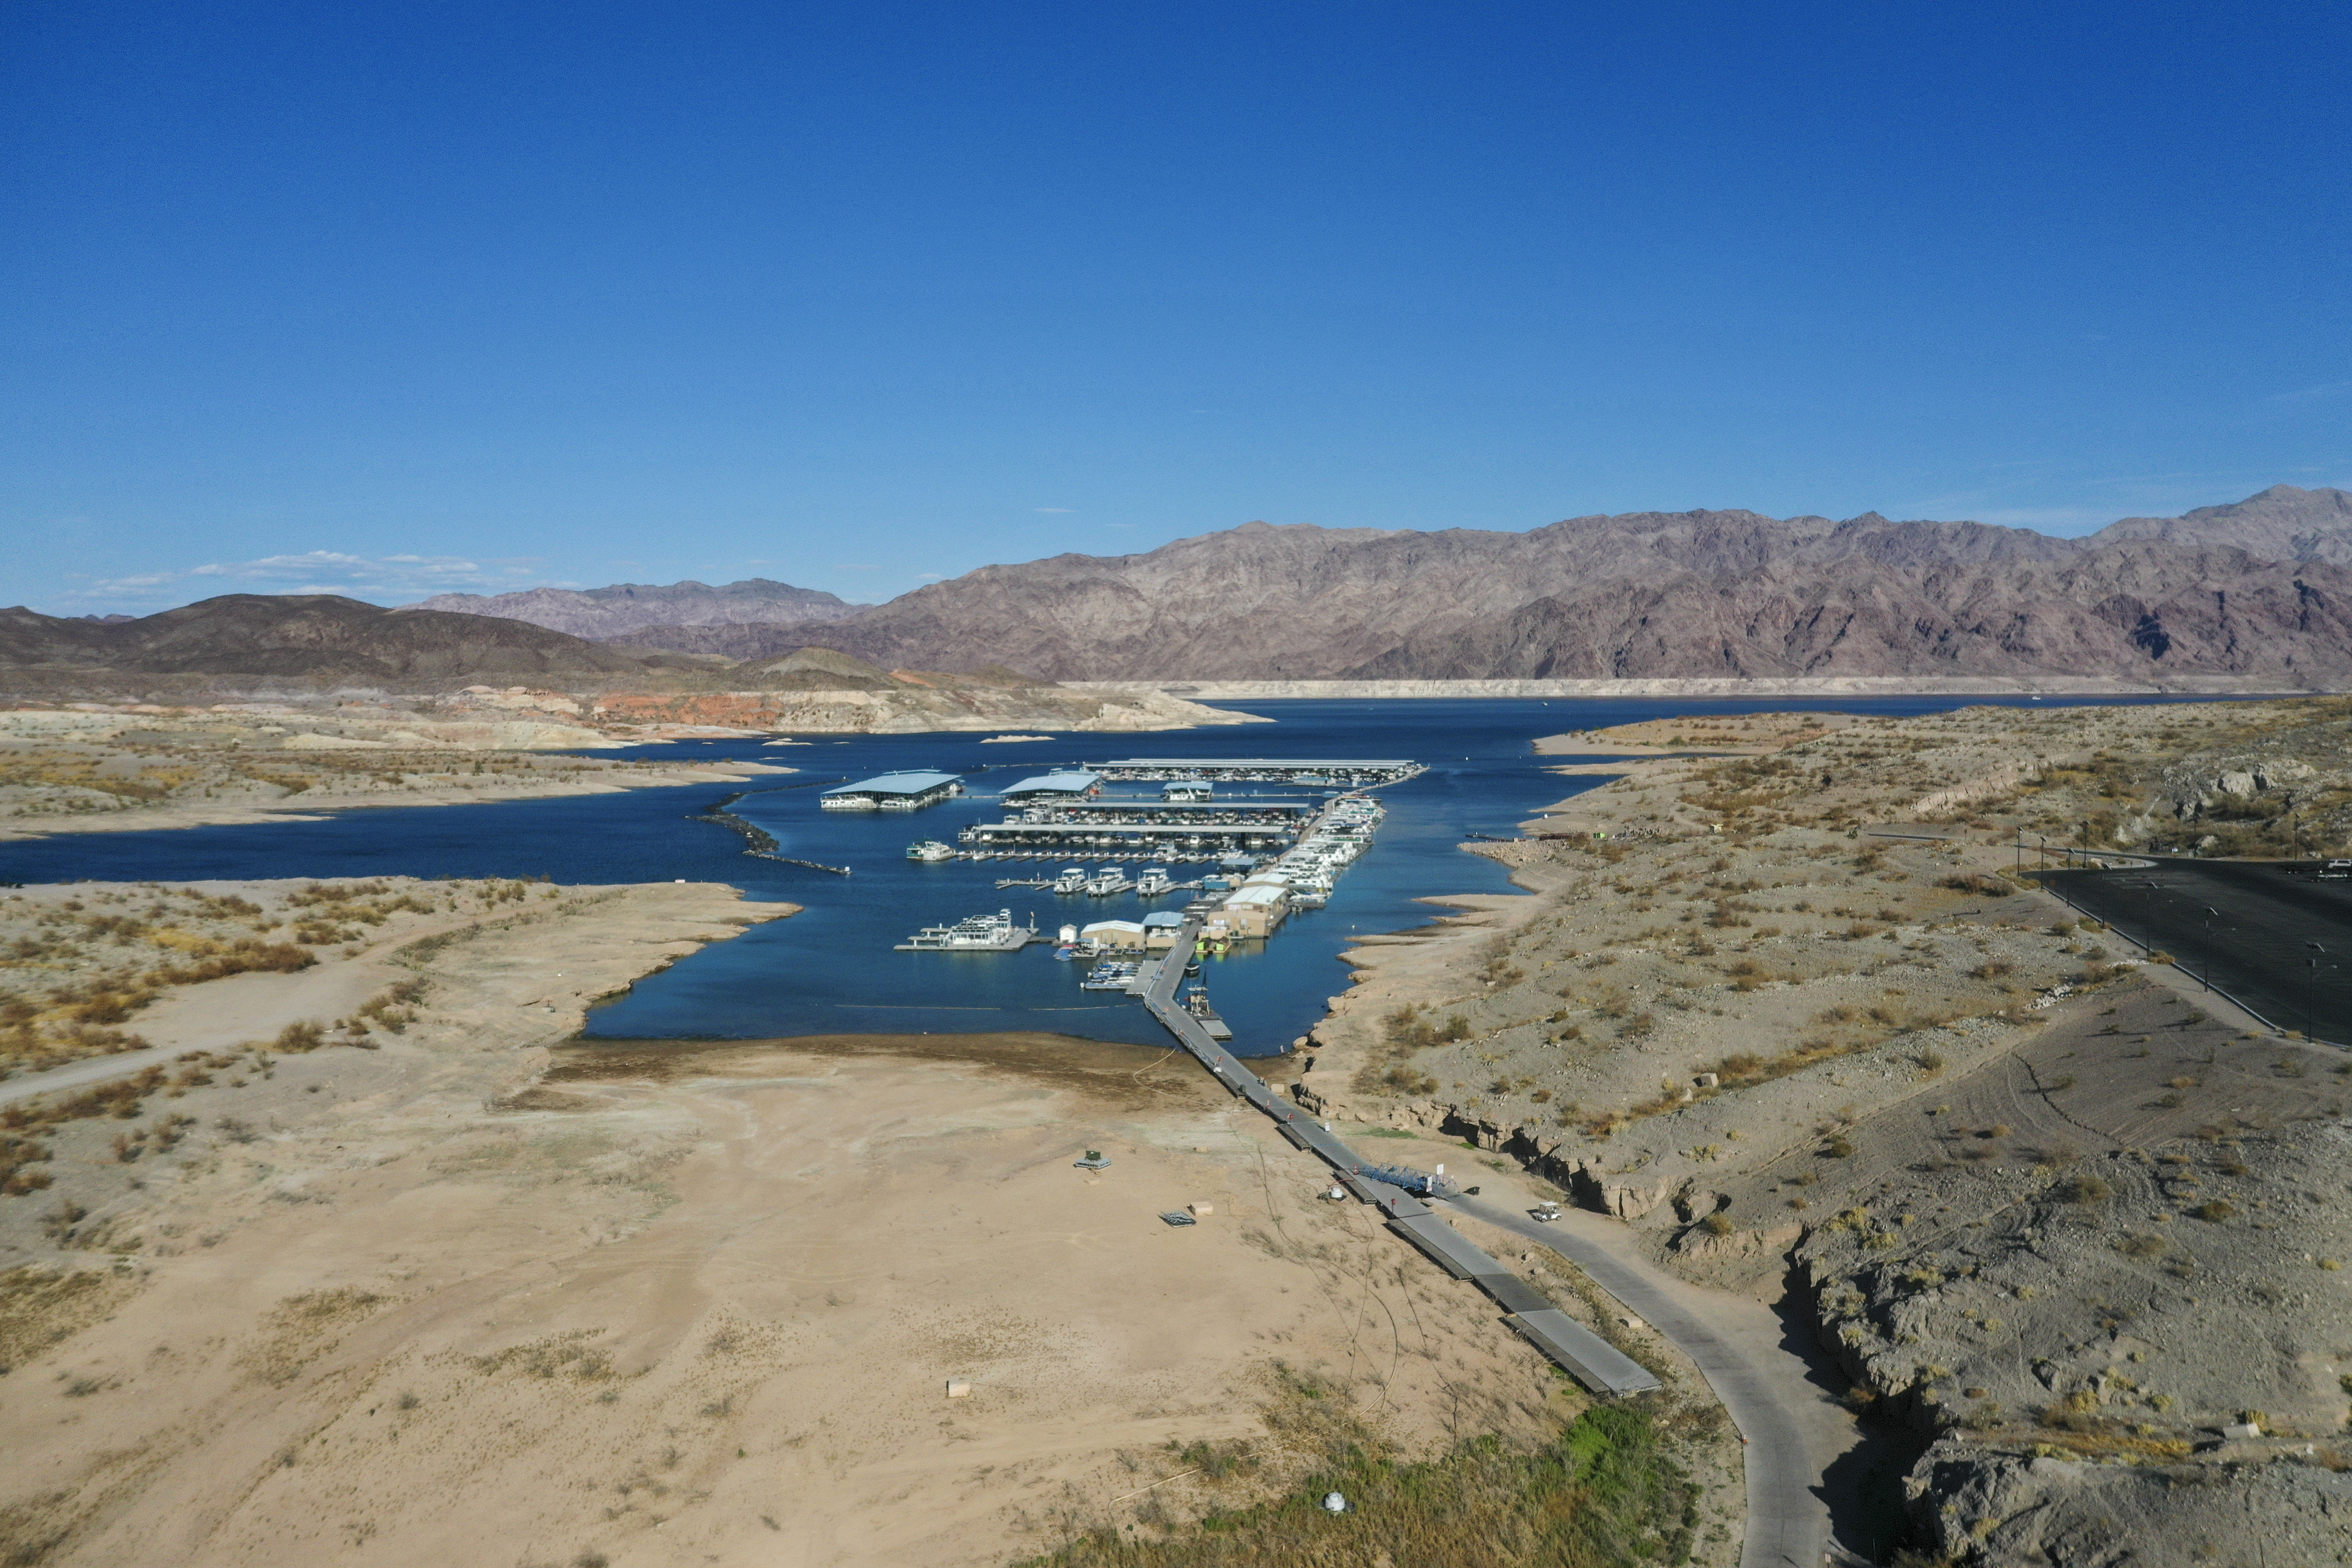 More human remains found at Lake Mead as reservoir’s water level plunges